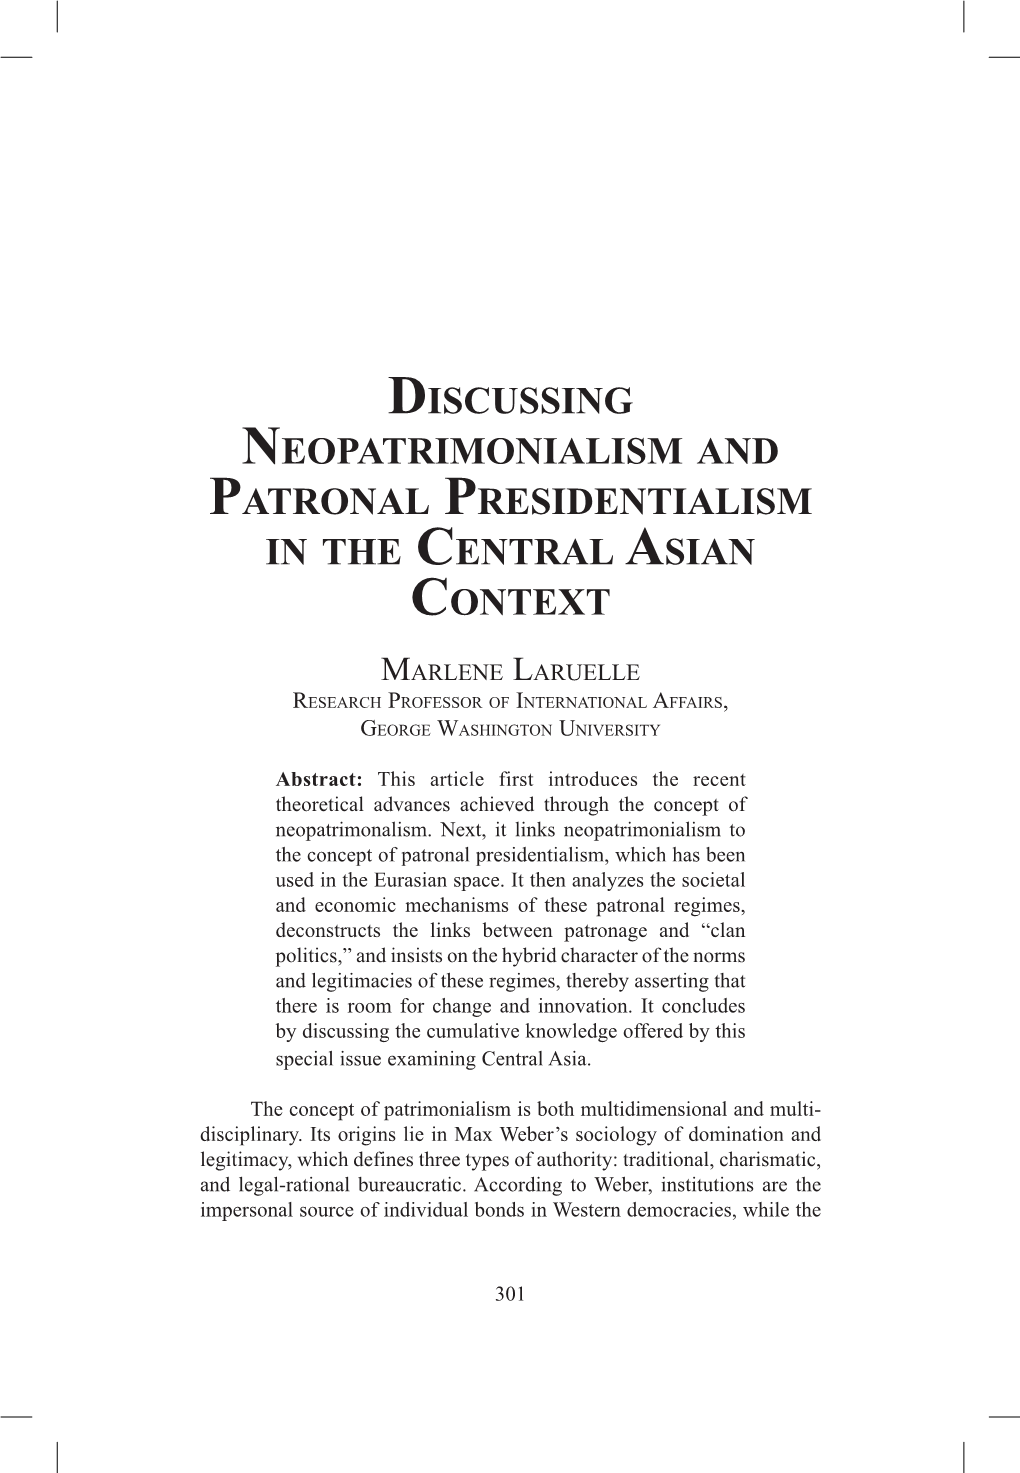 Discussing Neopatrimonialism and Patronal Presidentialism in the Central Asian Context